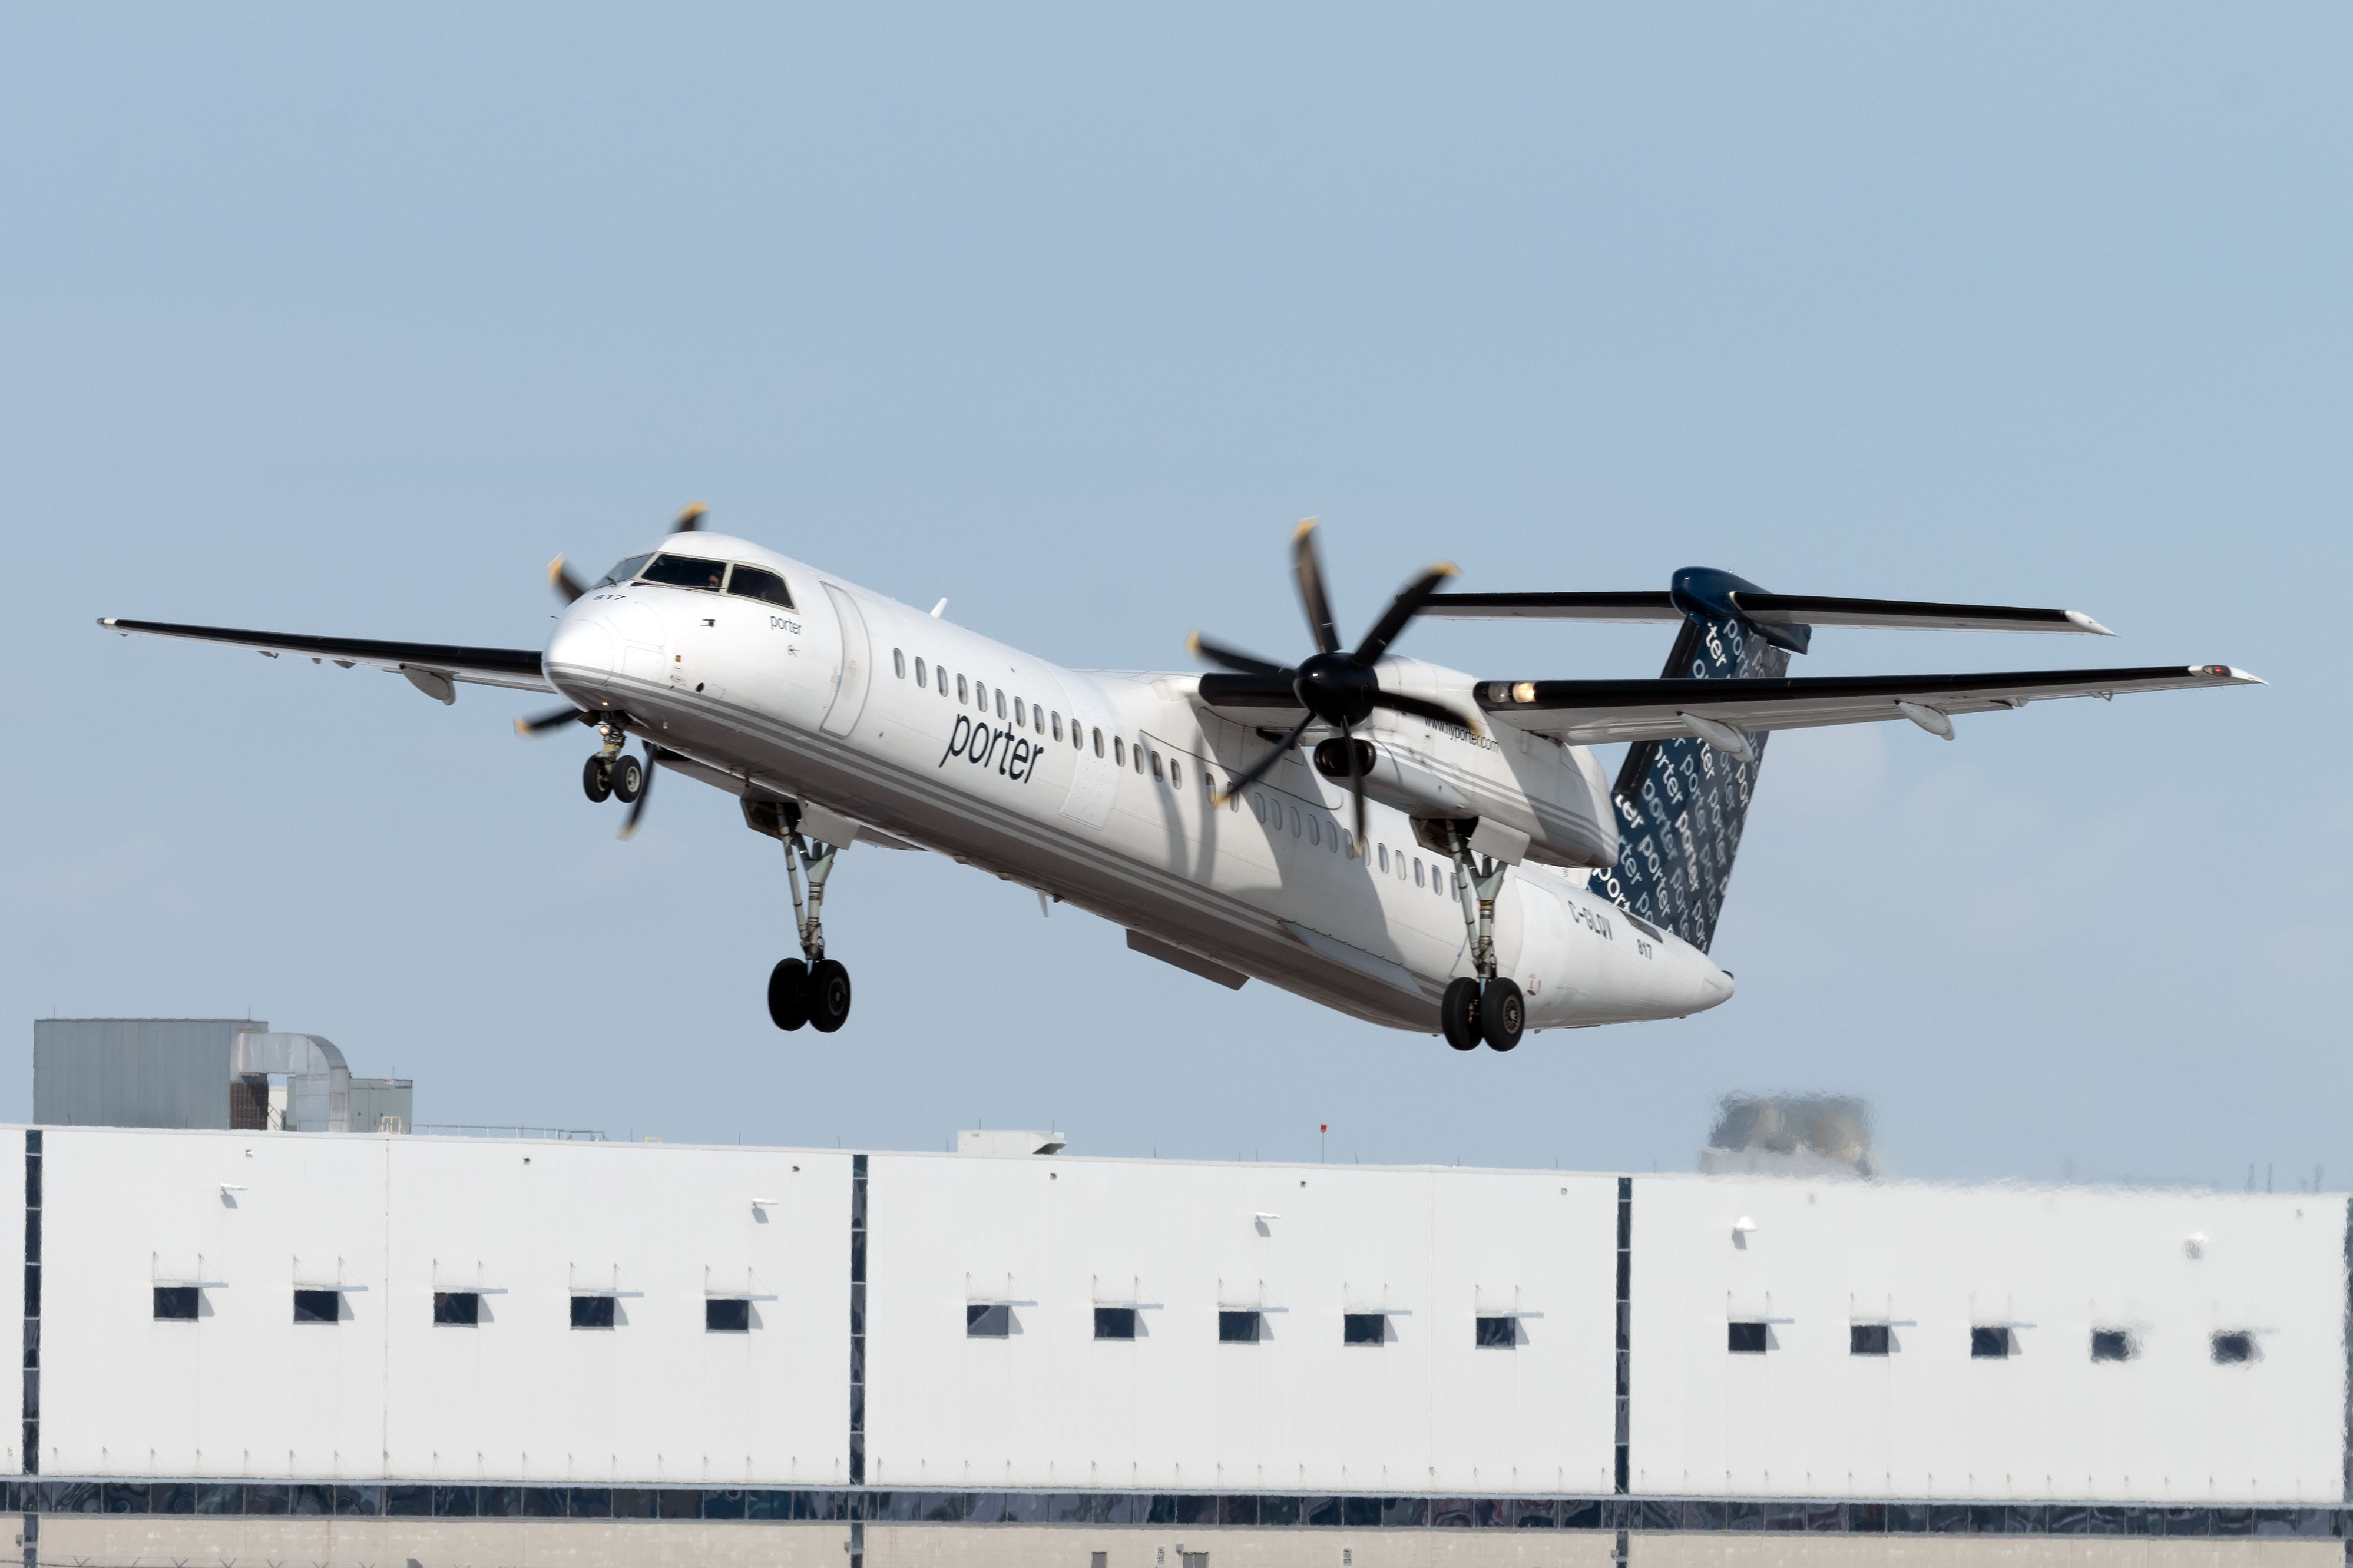 A Porter Airlines De Havilland Canada Dash 8-400 just after takeoff.